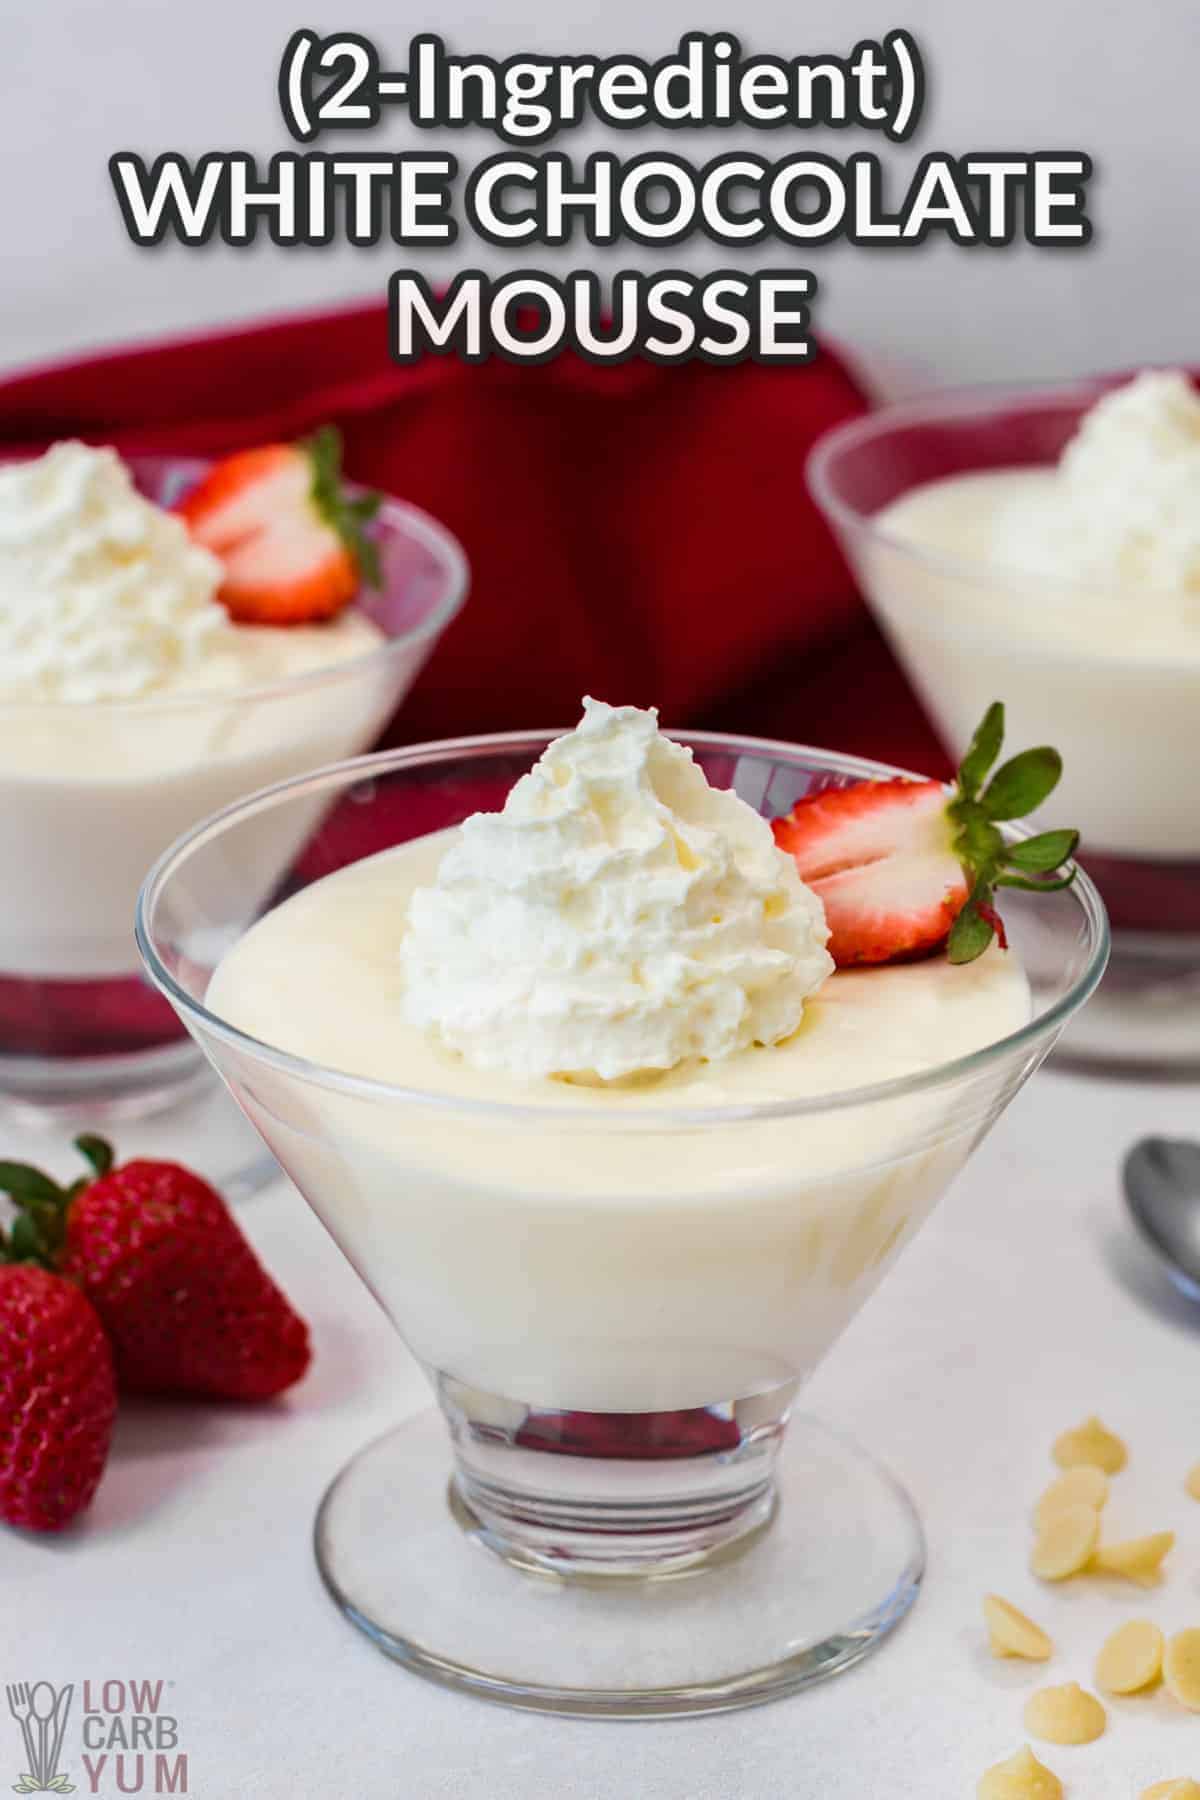 white chocolate mousse with text overlay.